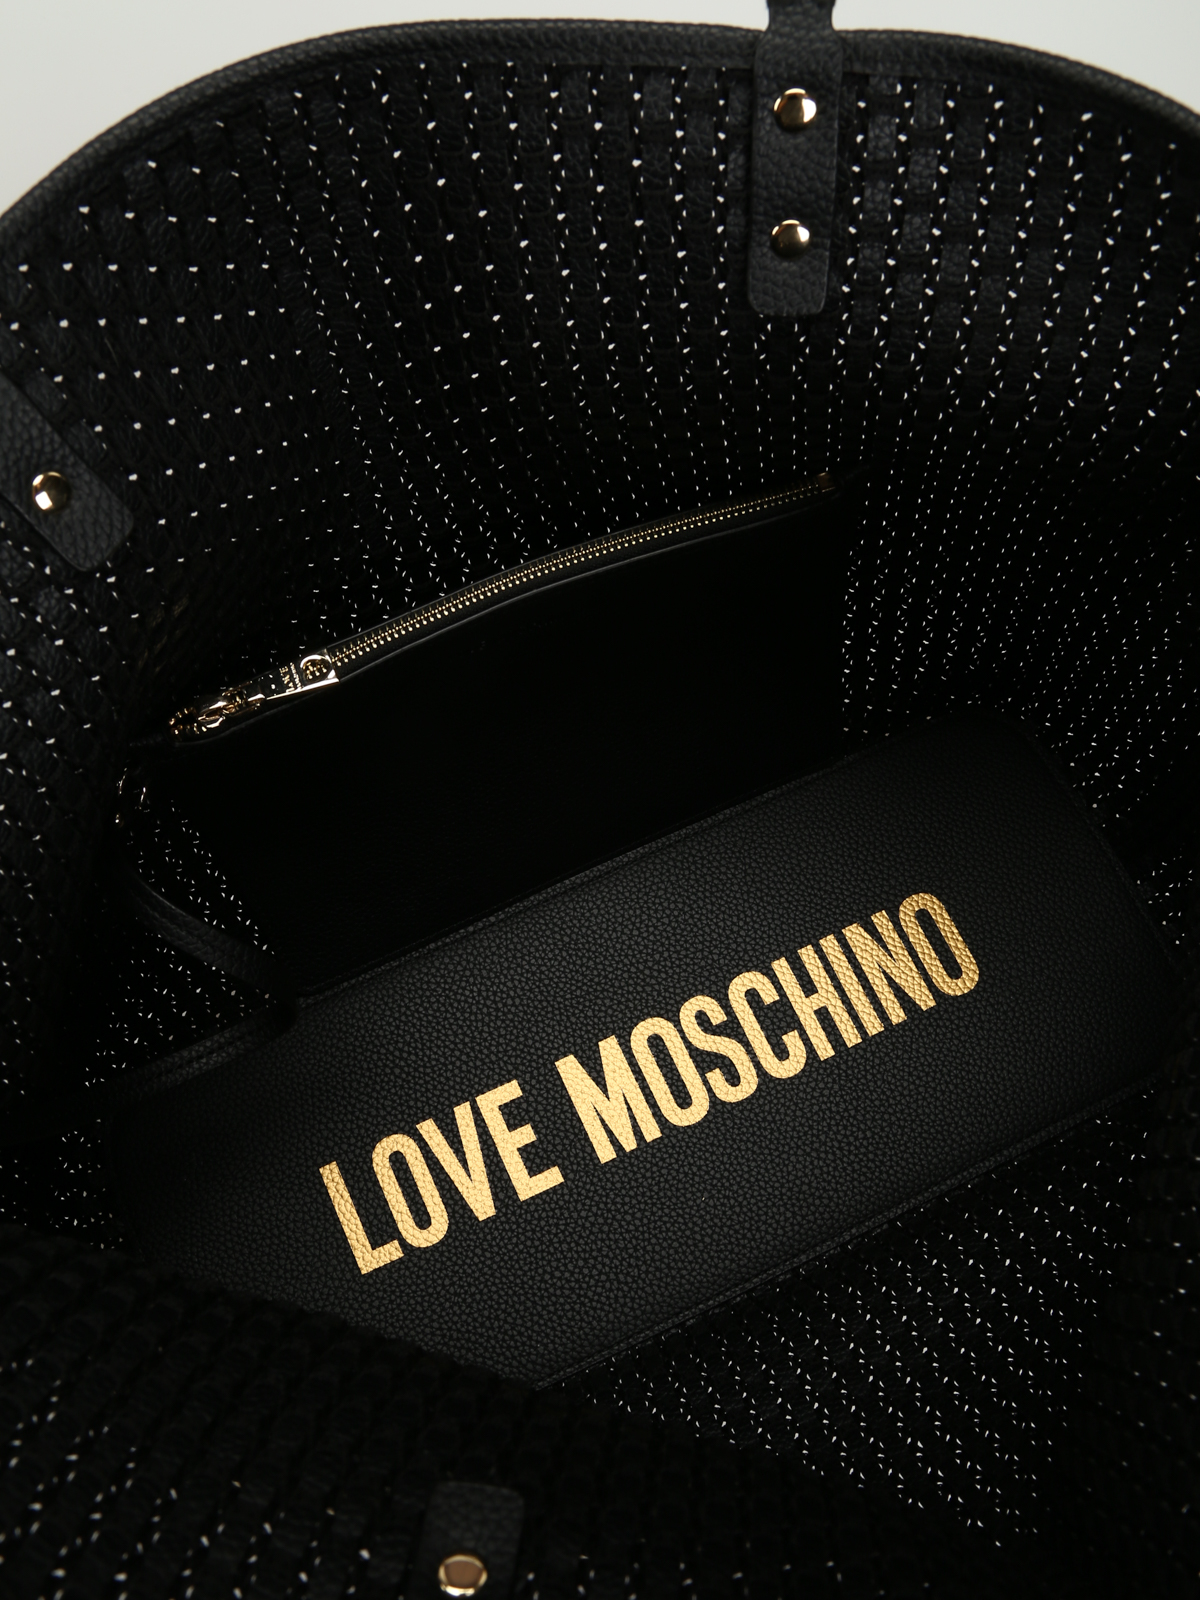 moschino black and gold bag